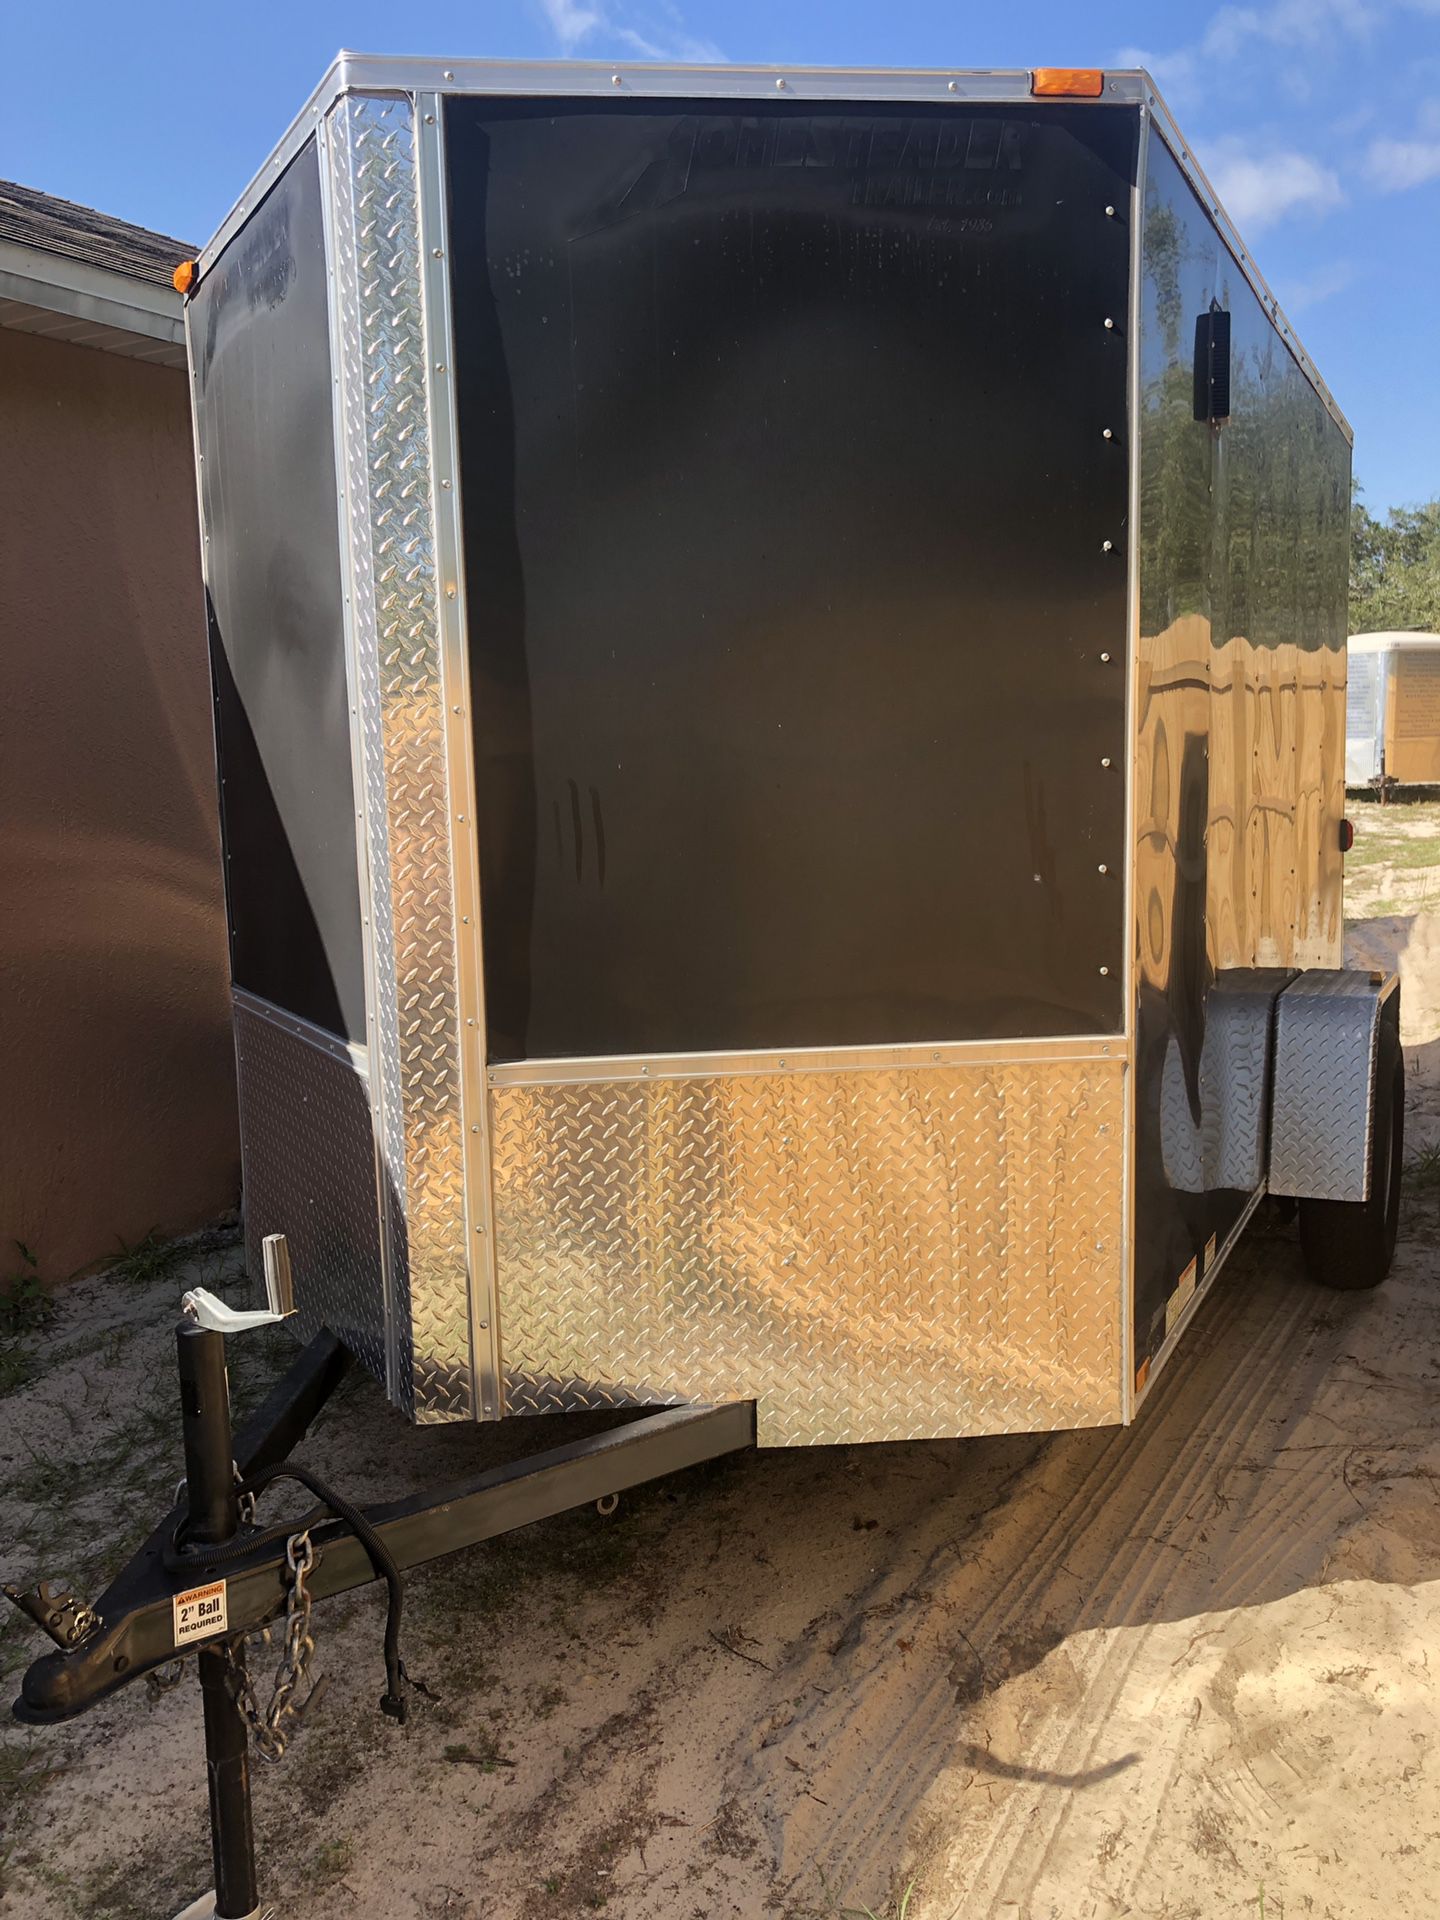 Trailer 6x10 2018 NEW title in hand private seller OBO!!!!